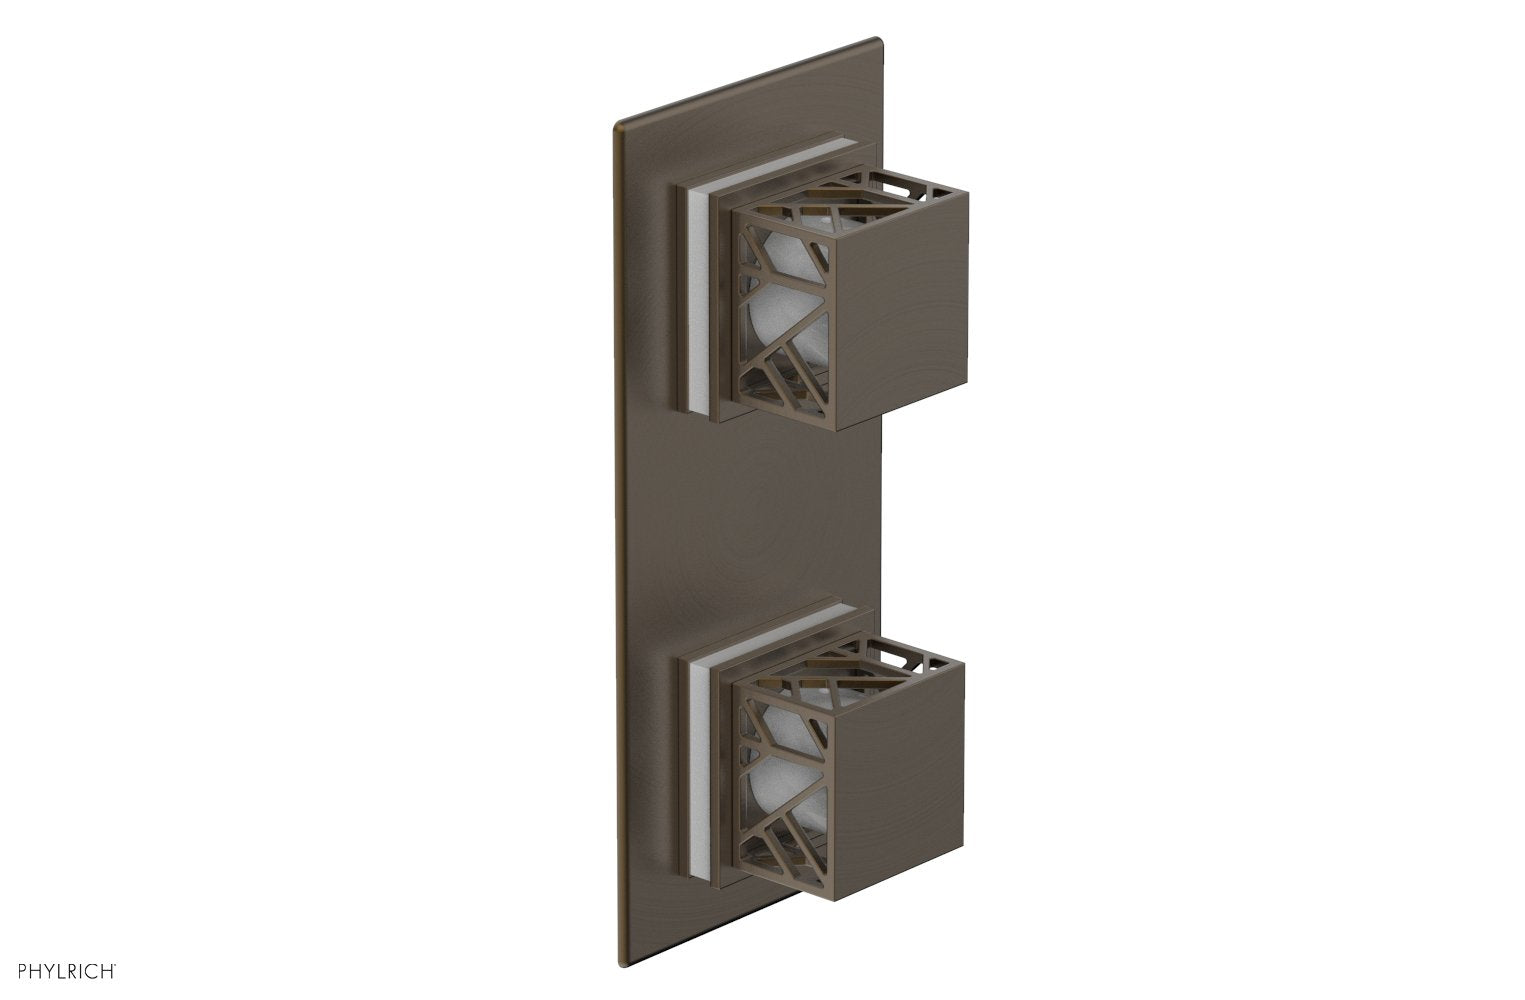 Phylrich JOLIE Thermostatic Valve with Volume Control or Diverter with "White" Accents